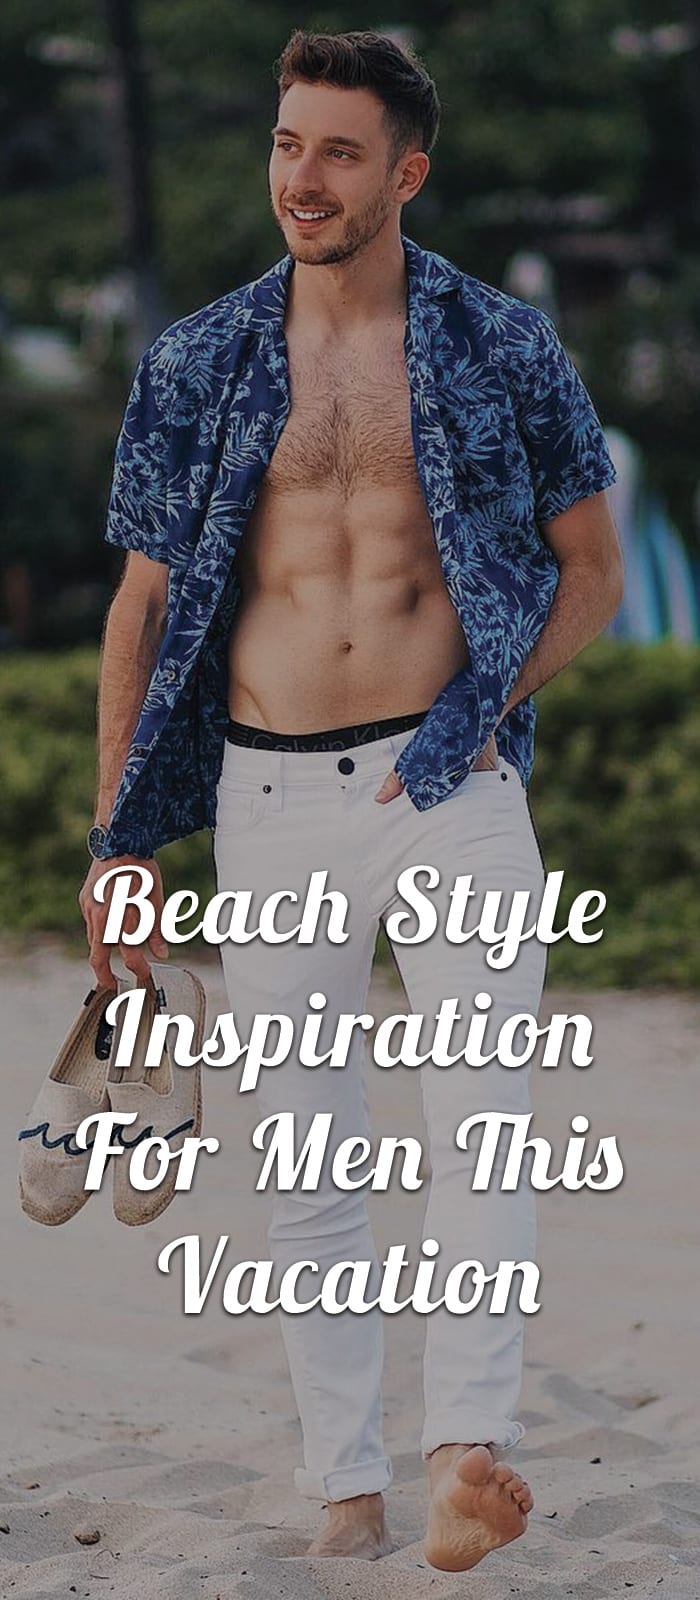 Beach-Style-Inspiration-For-Men-This-Vacation